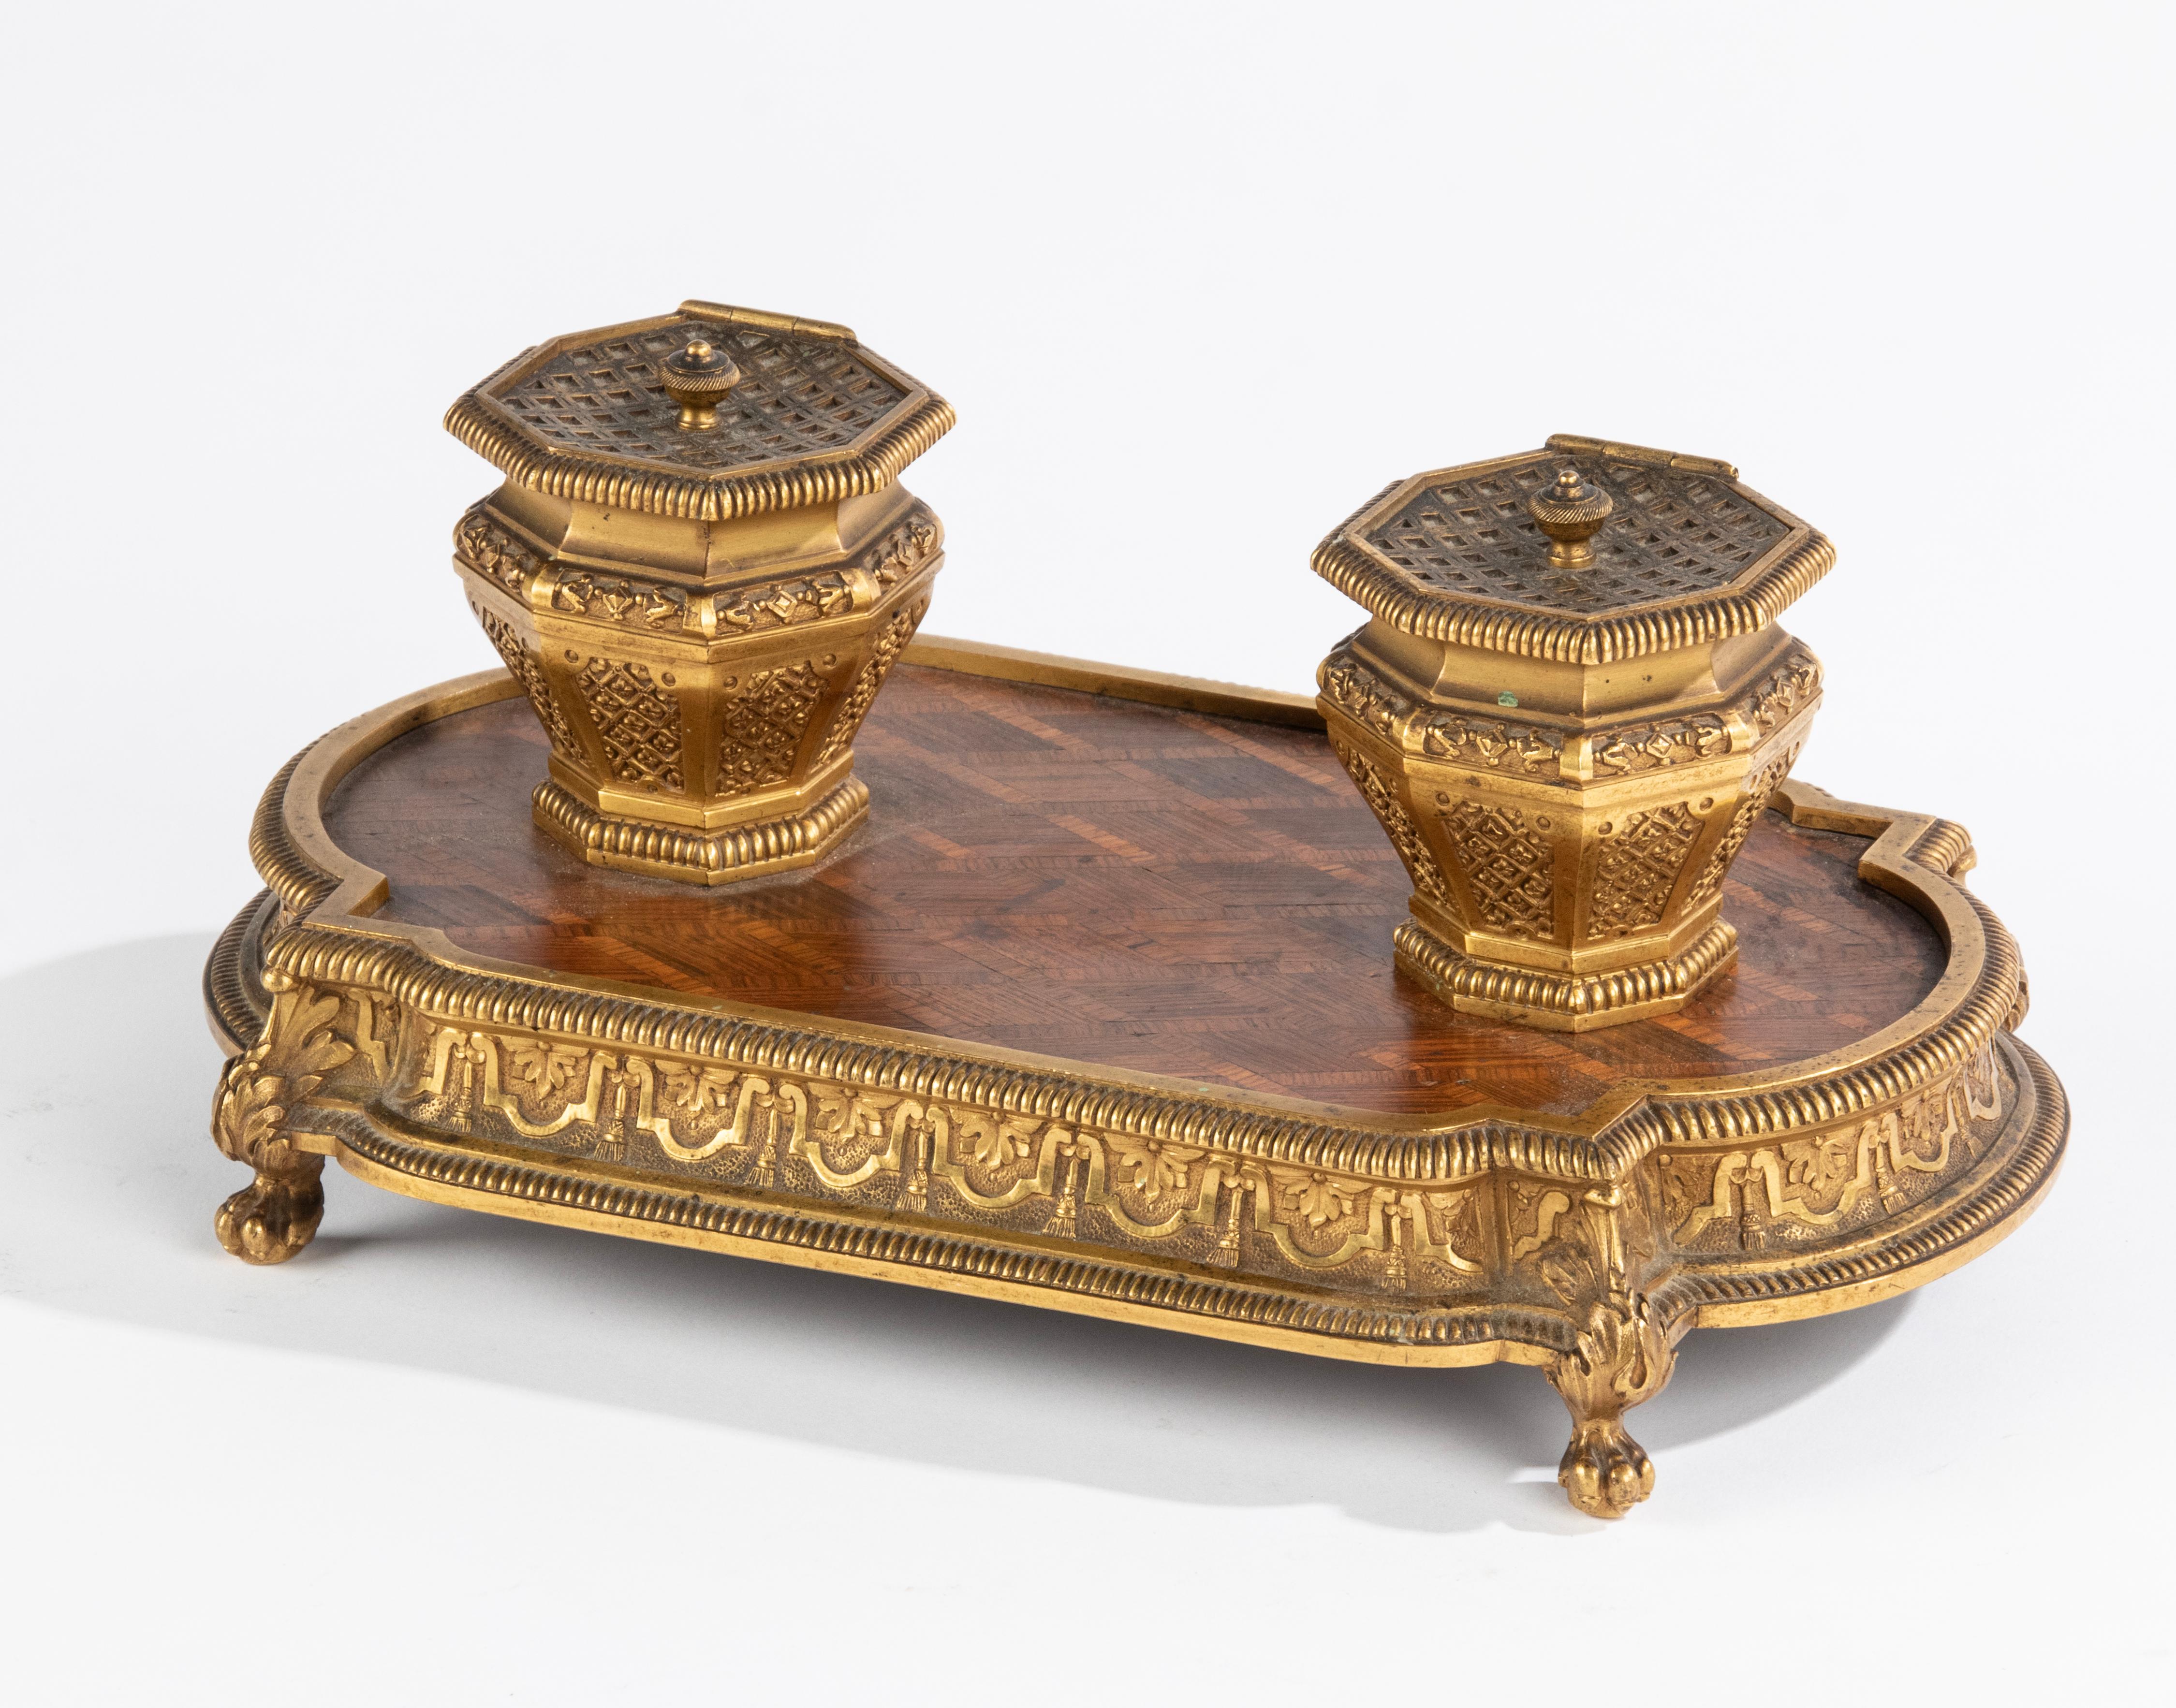 A refined antique inkwell, with two inkwells made of bronze, including glass cups. The base is made of veneered marquetry wood with a diamond pattern, framed in a bronze rim, resting on clawfeet. Nice classic desk accessory. Made in France, at the